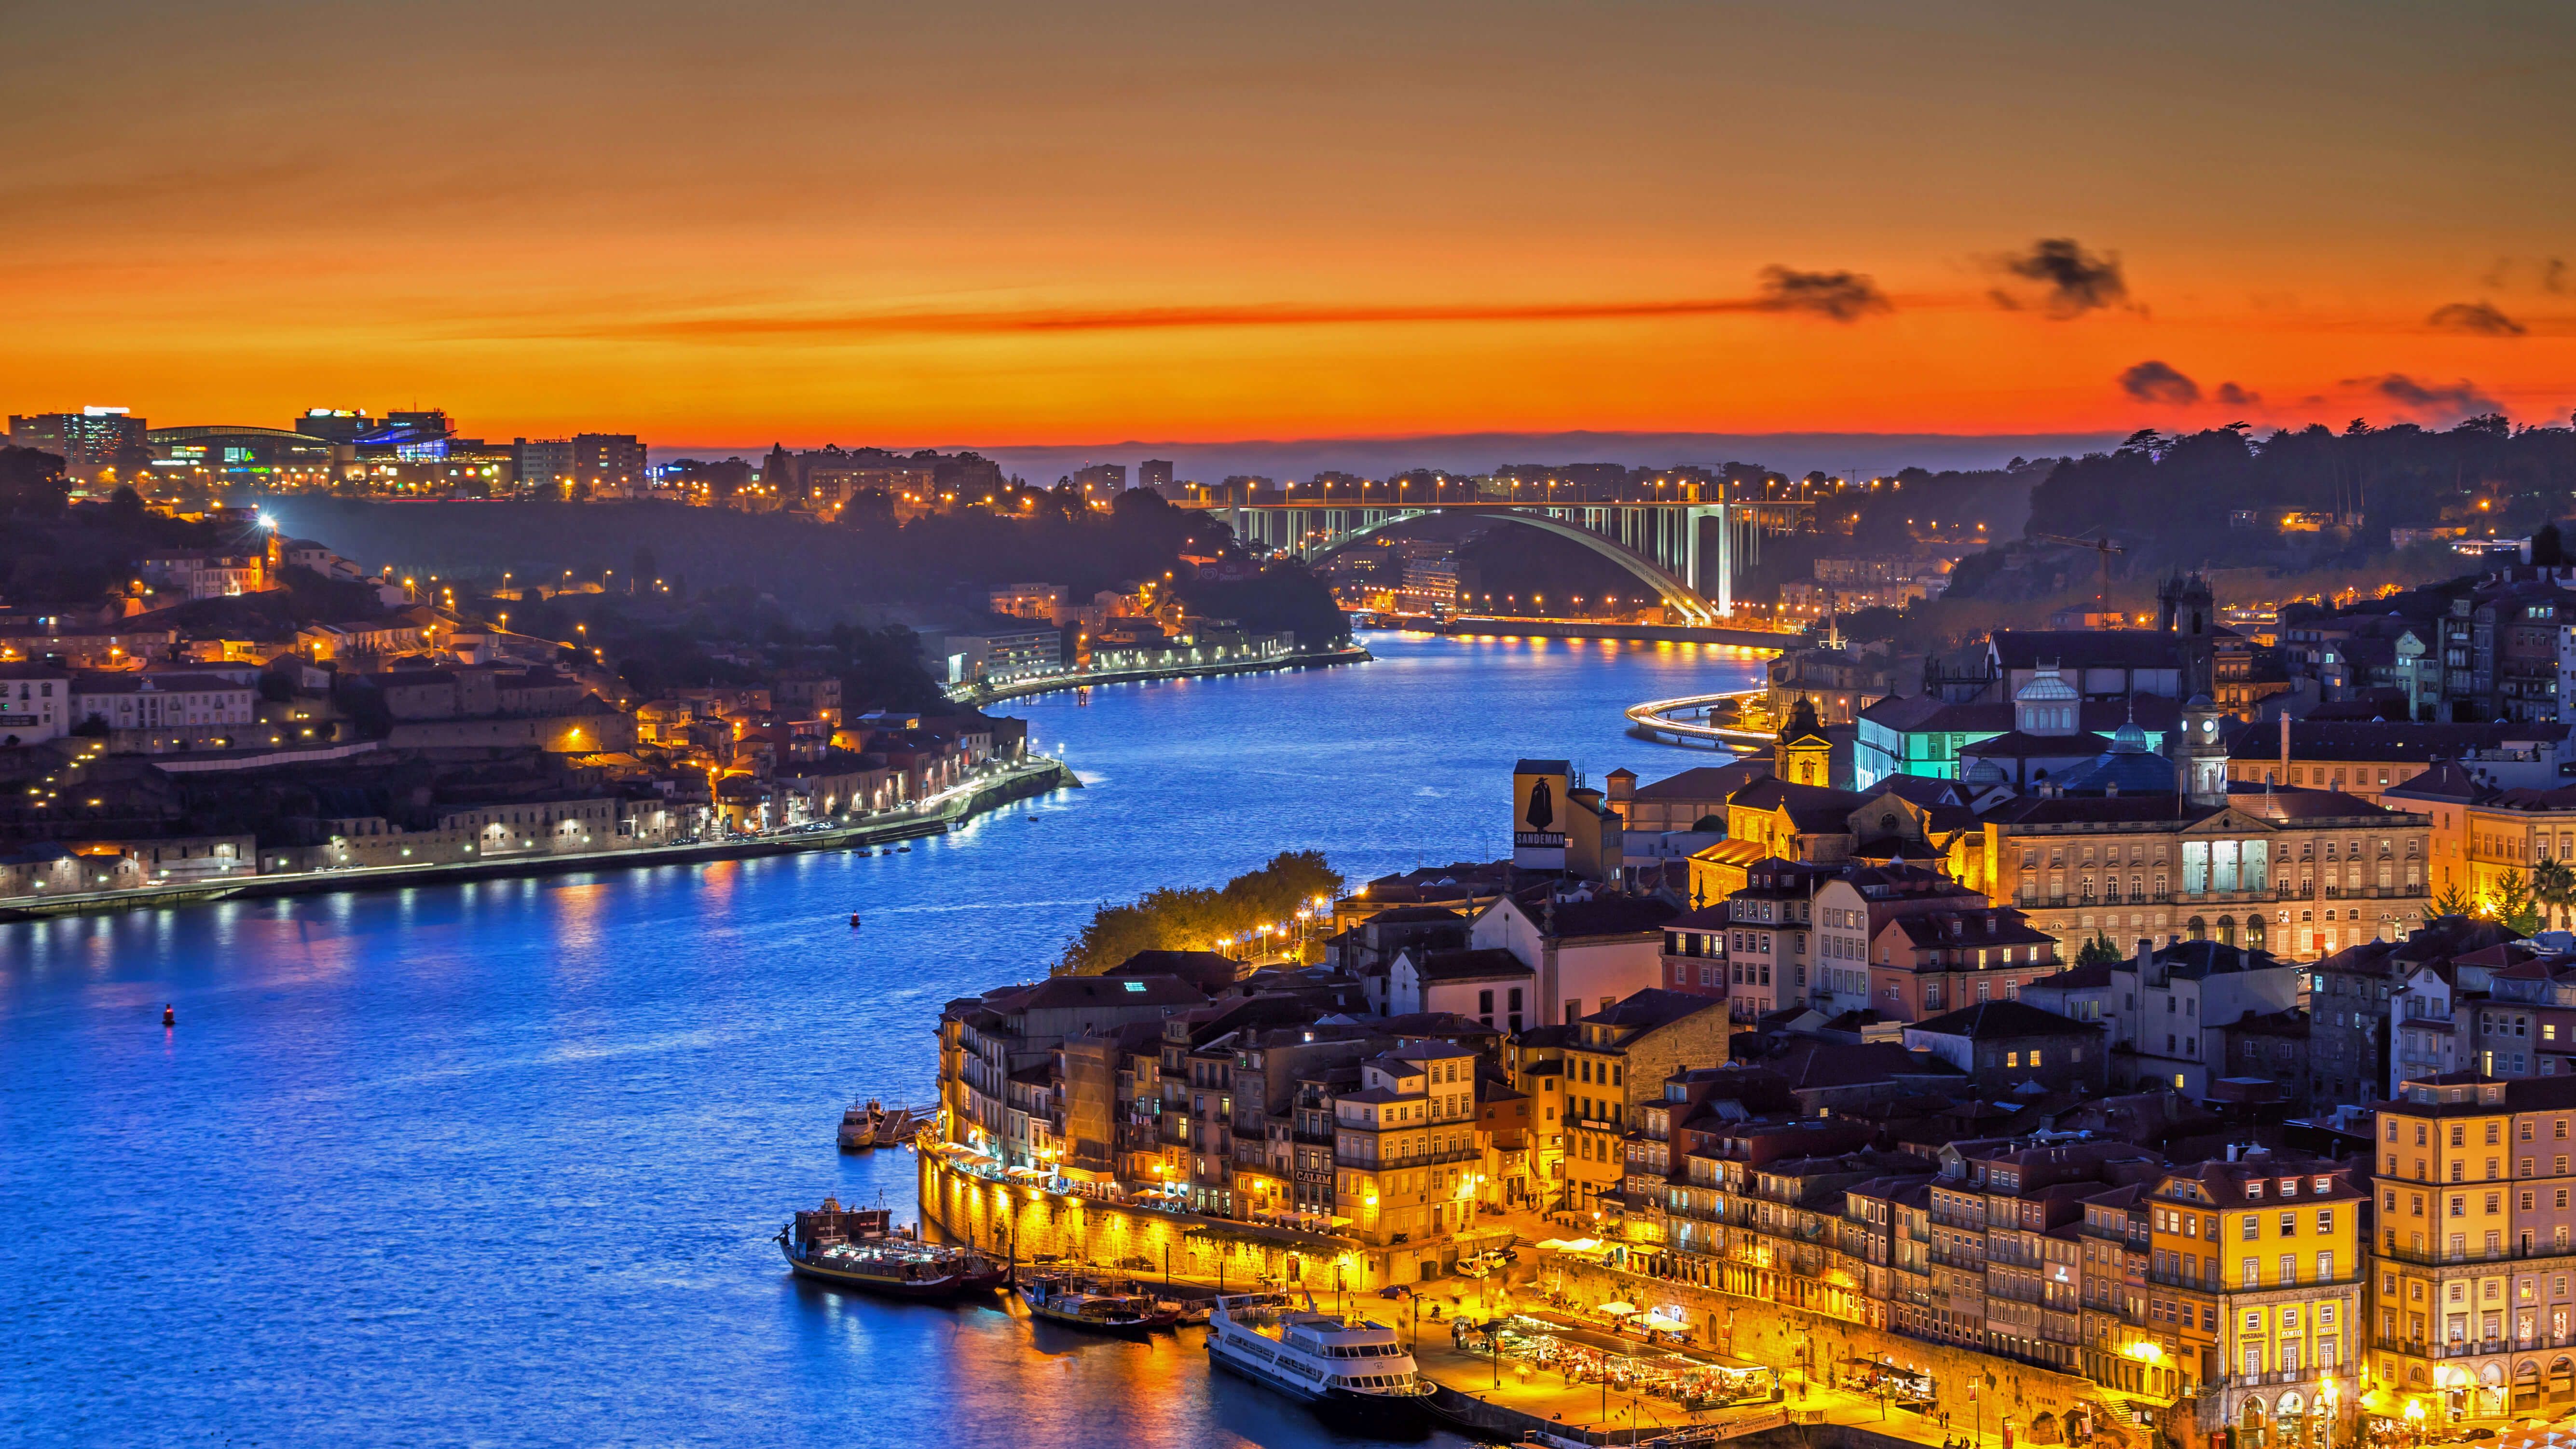 Portugal 4K wallpaper for your desktop or mobile screen free and easy to download